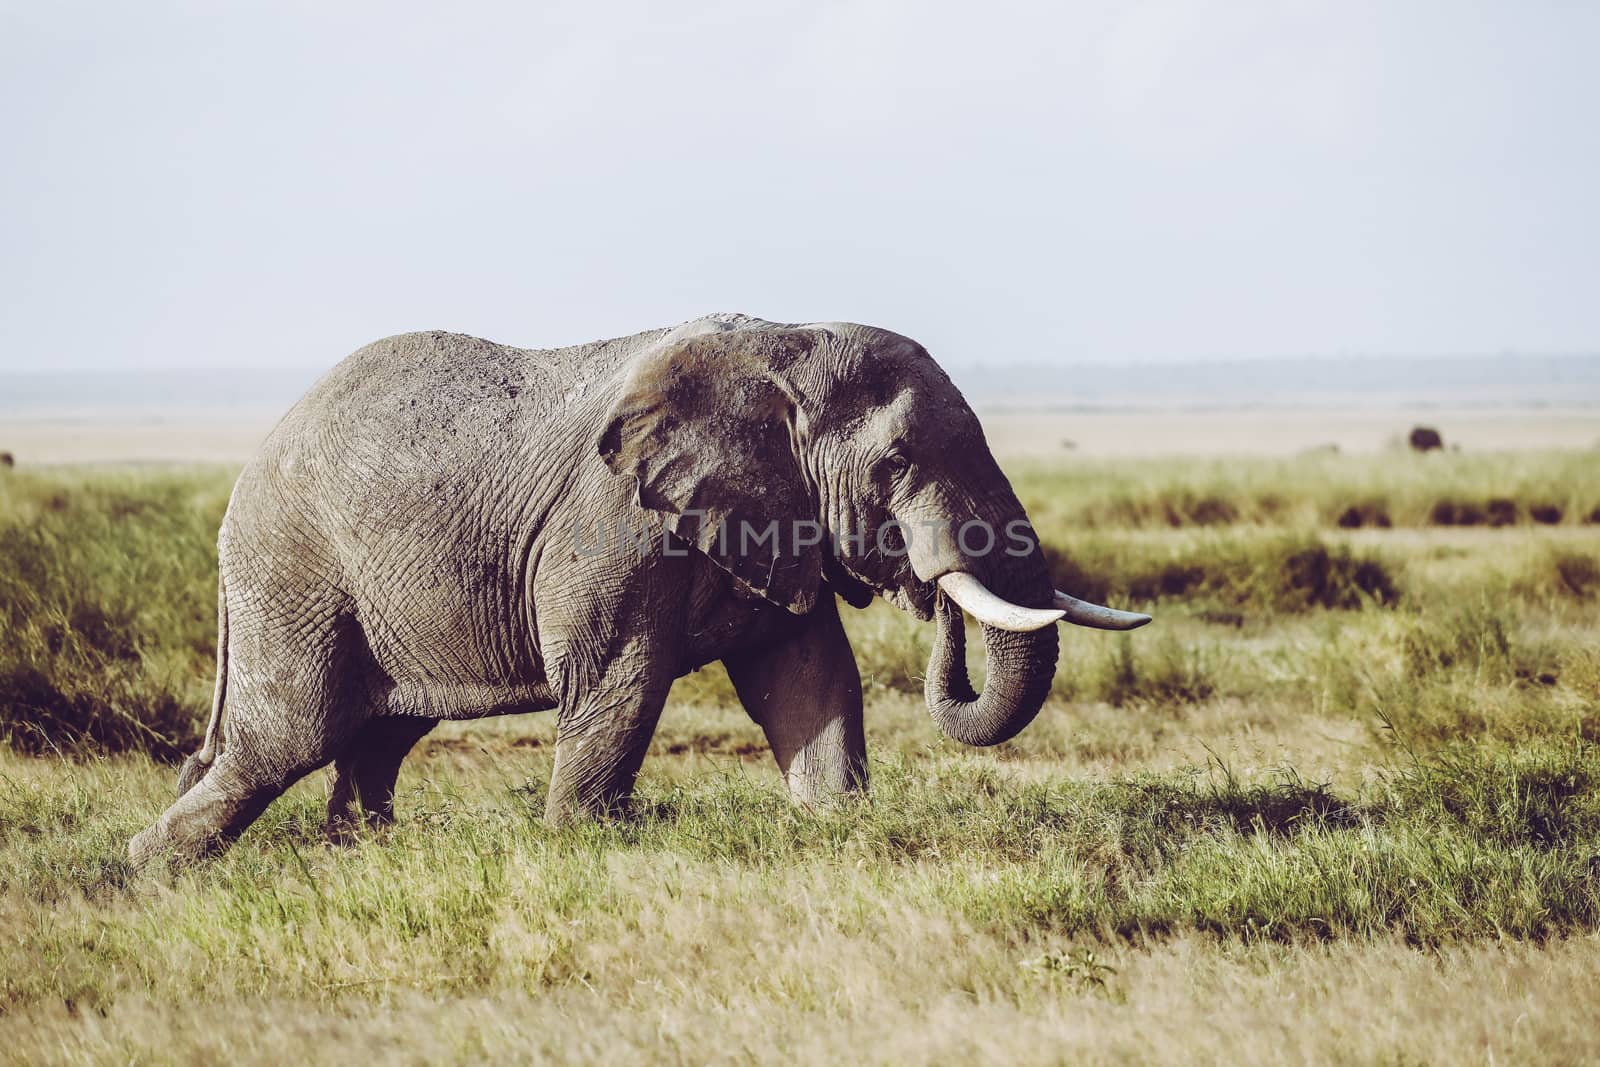 Elephant in Amboseli national Park by Weltblick